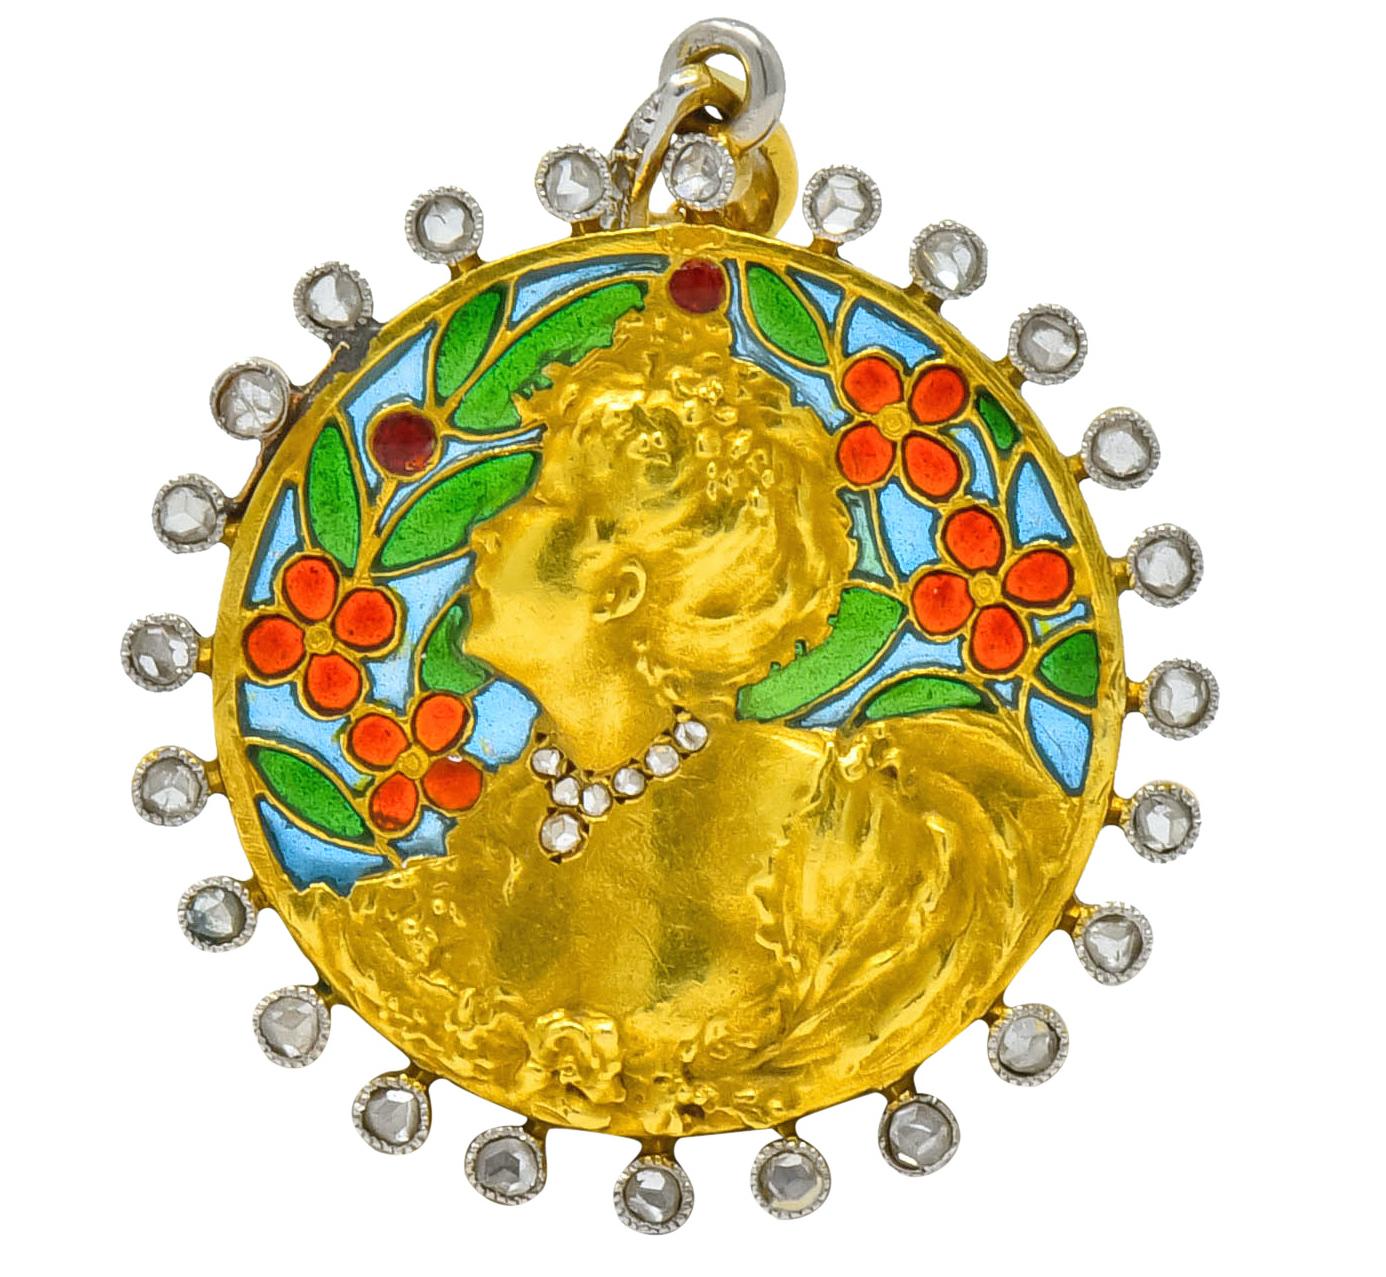 Centering a round disk pendant depicting a highly rendered, impressionist inspired, image of a fancily dressed woman

With red and green floral foliate plique-à-jour enamel background 

Surrounded by rose cut diamonds, bezel set in millegrain